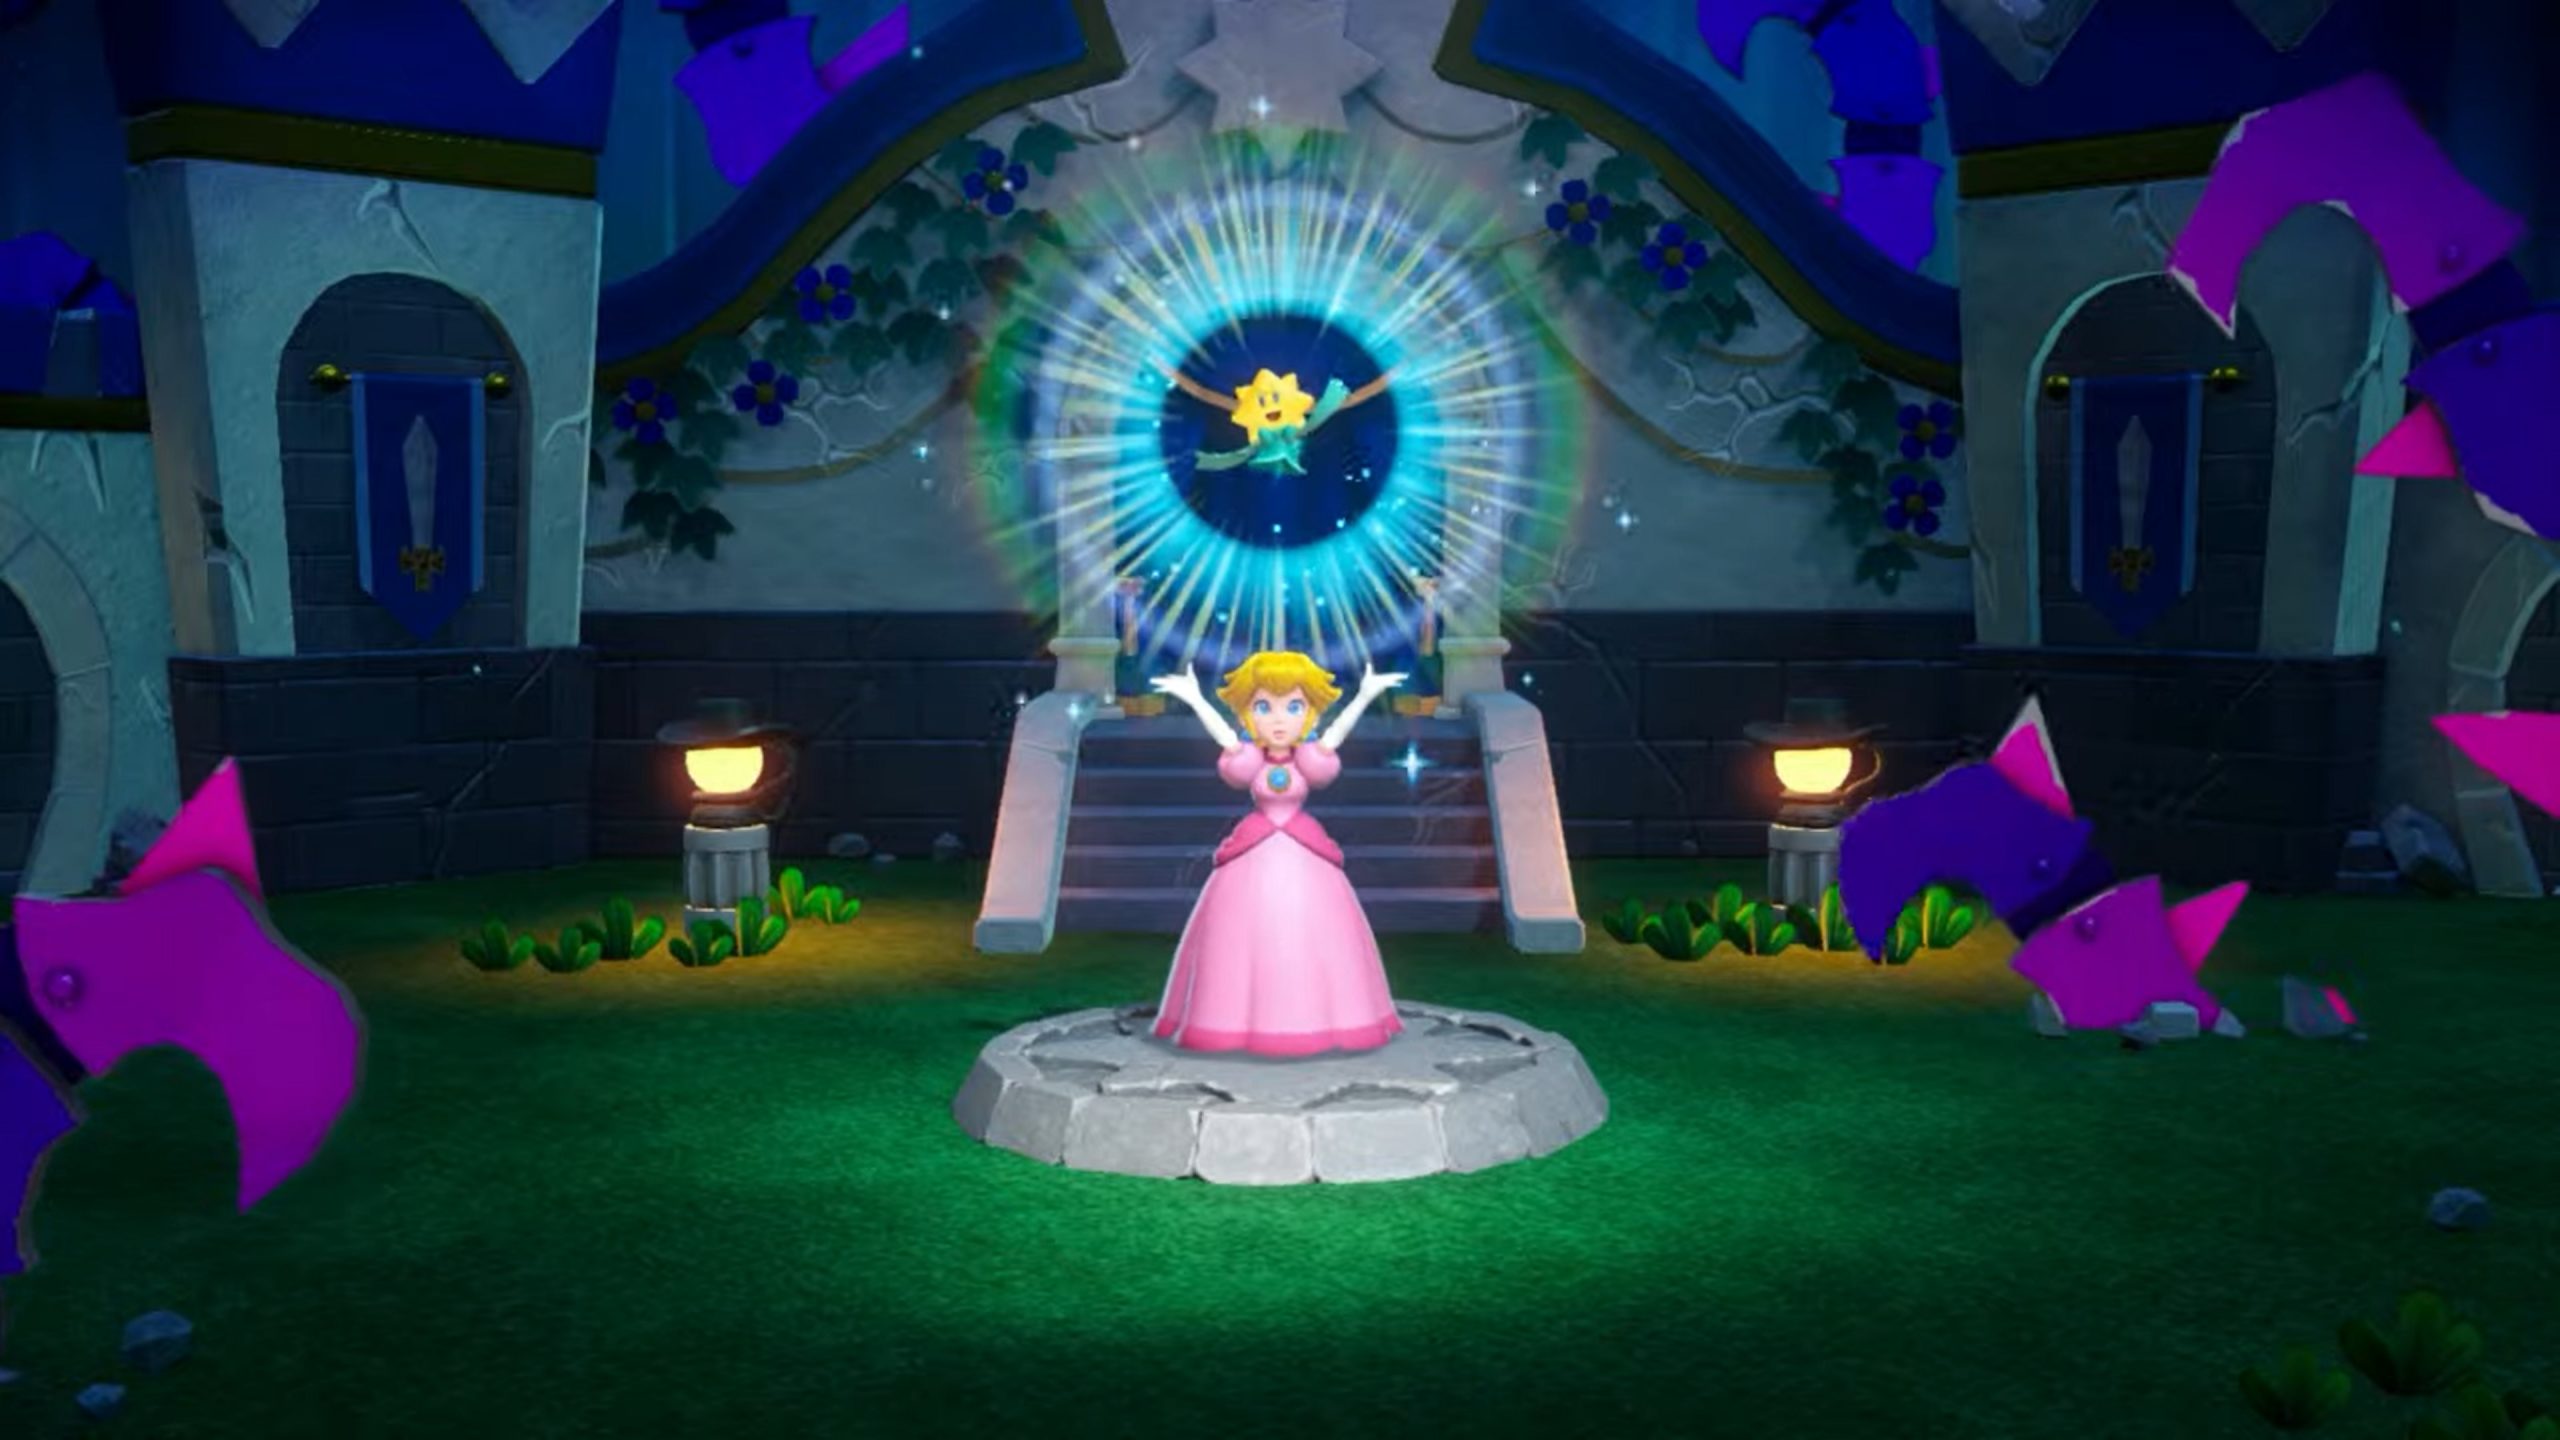 Nintendo Announces New Princess Peach Solo Game, Complete With